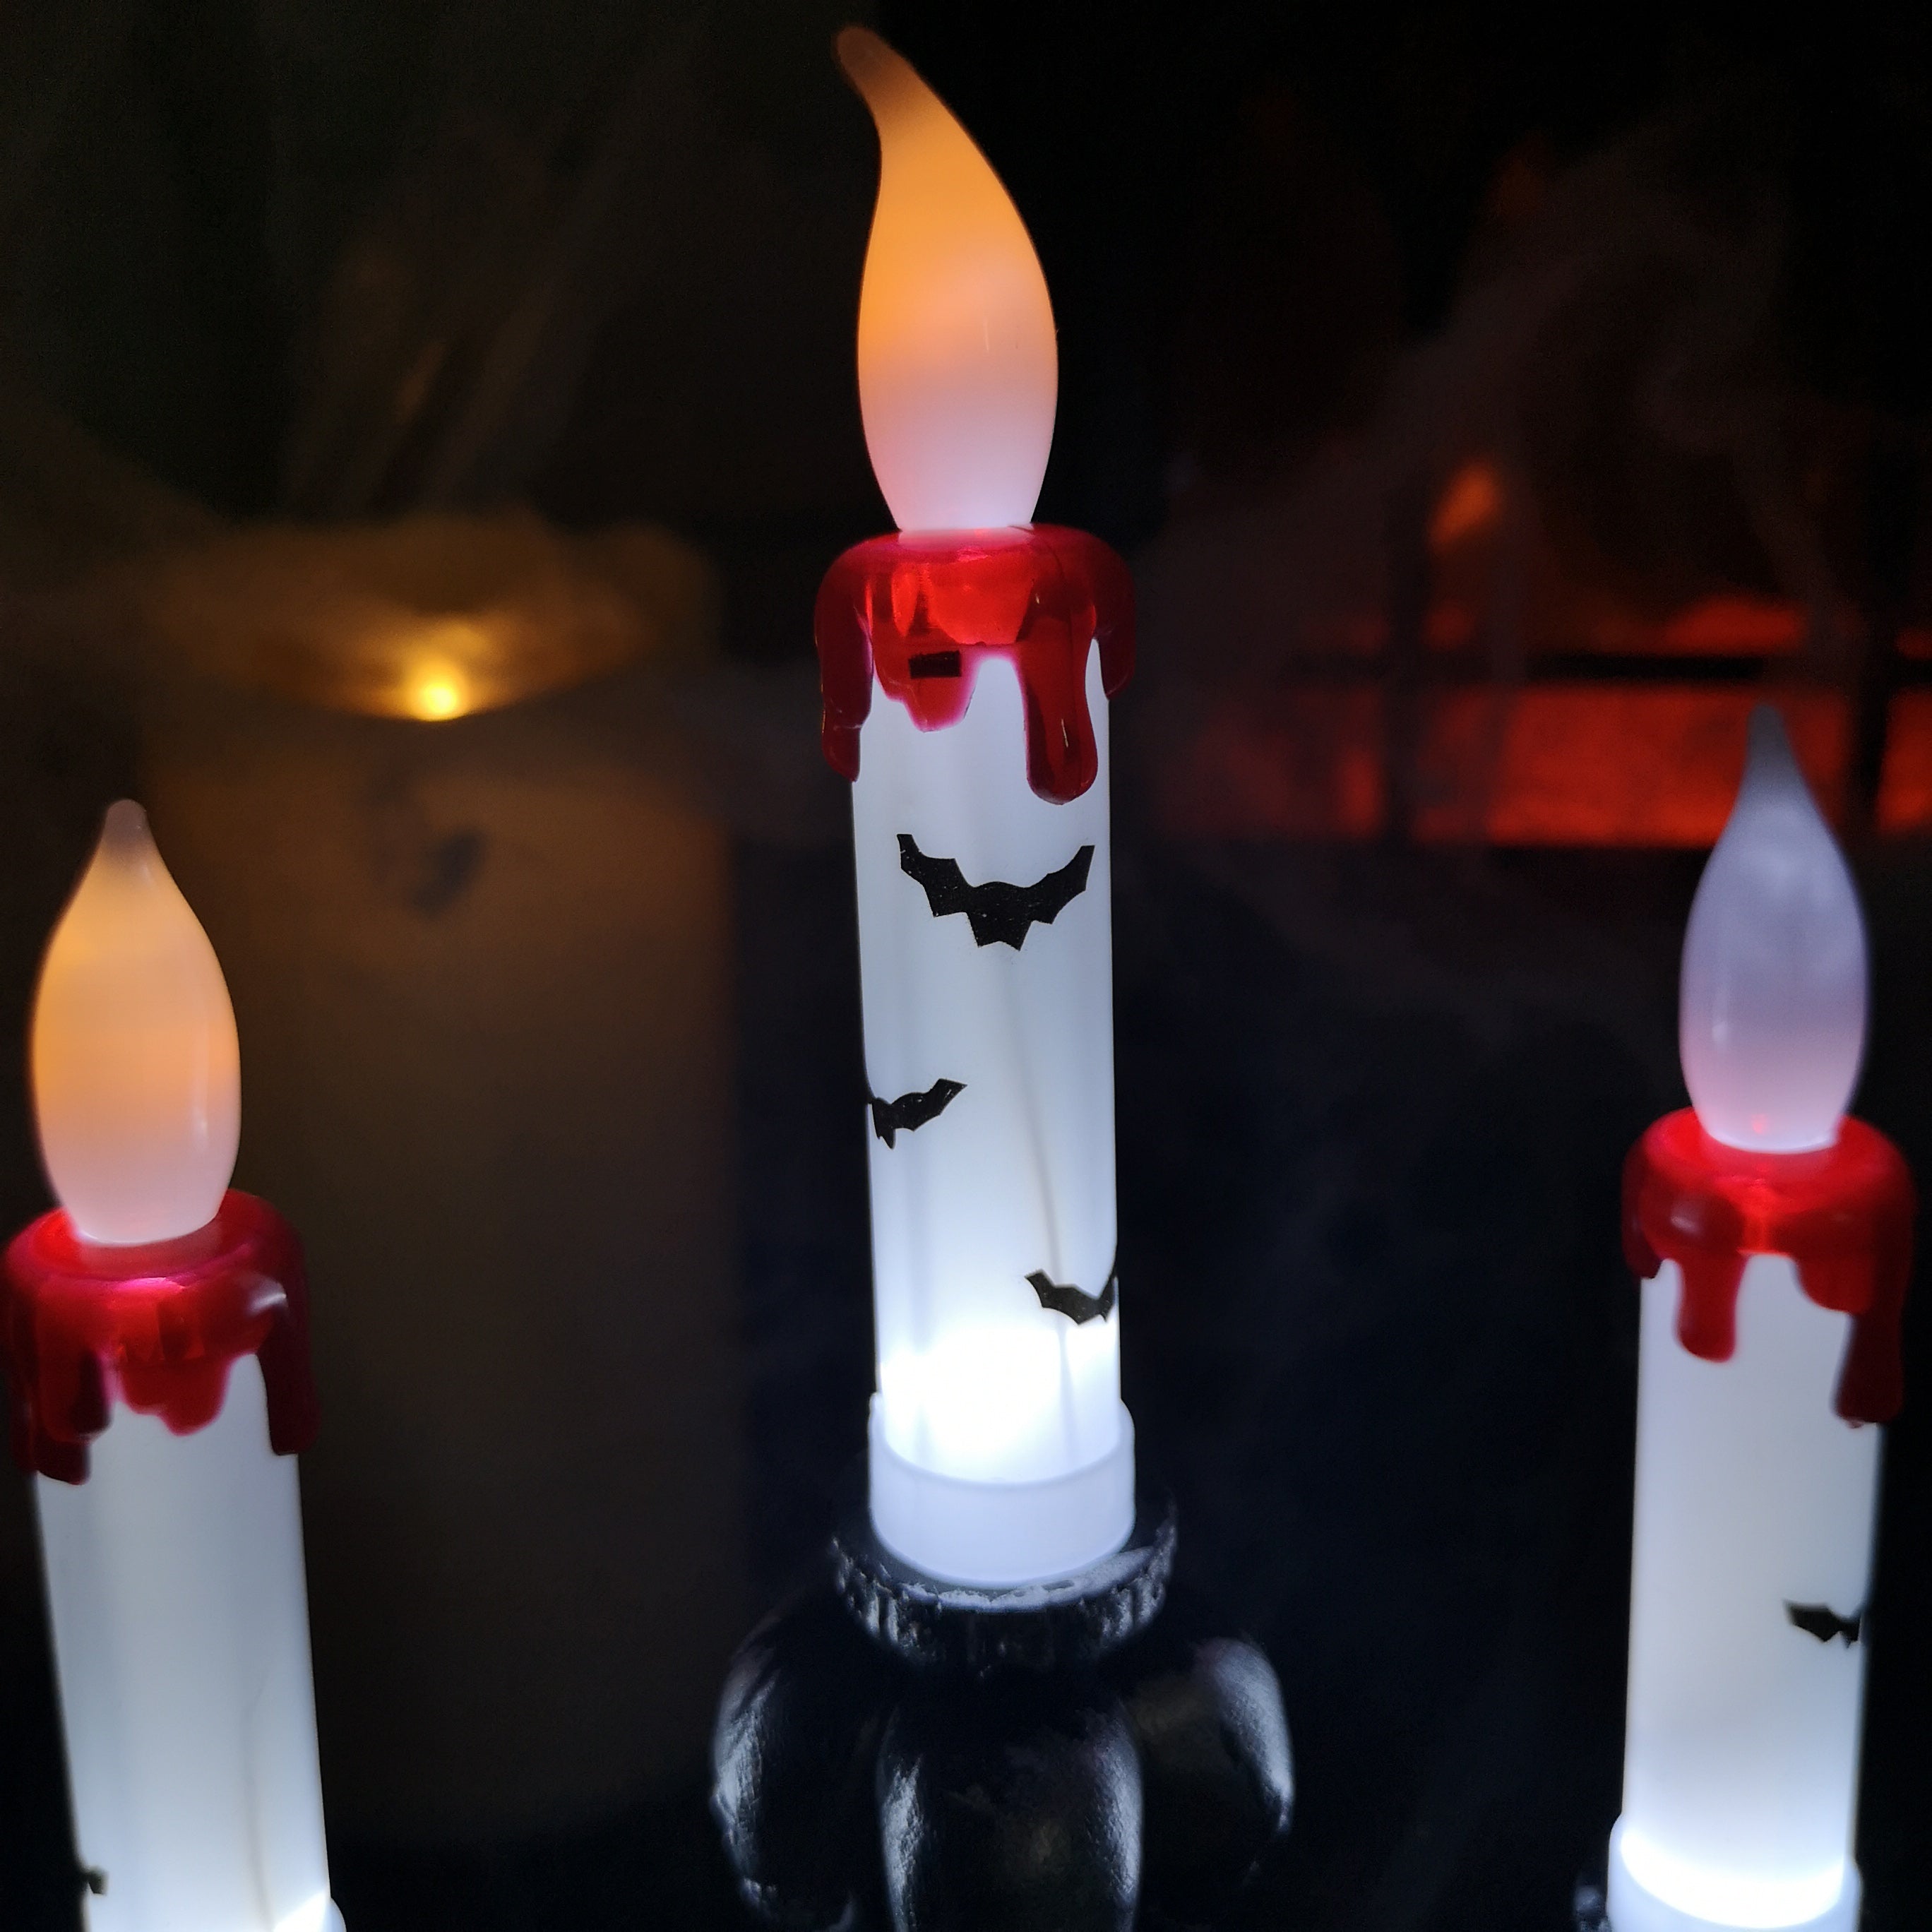 LED Light up triple candlestick Scary Halloween Decoration